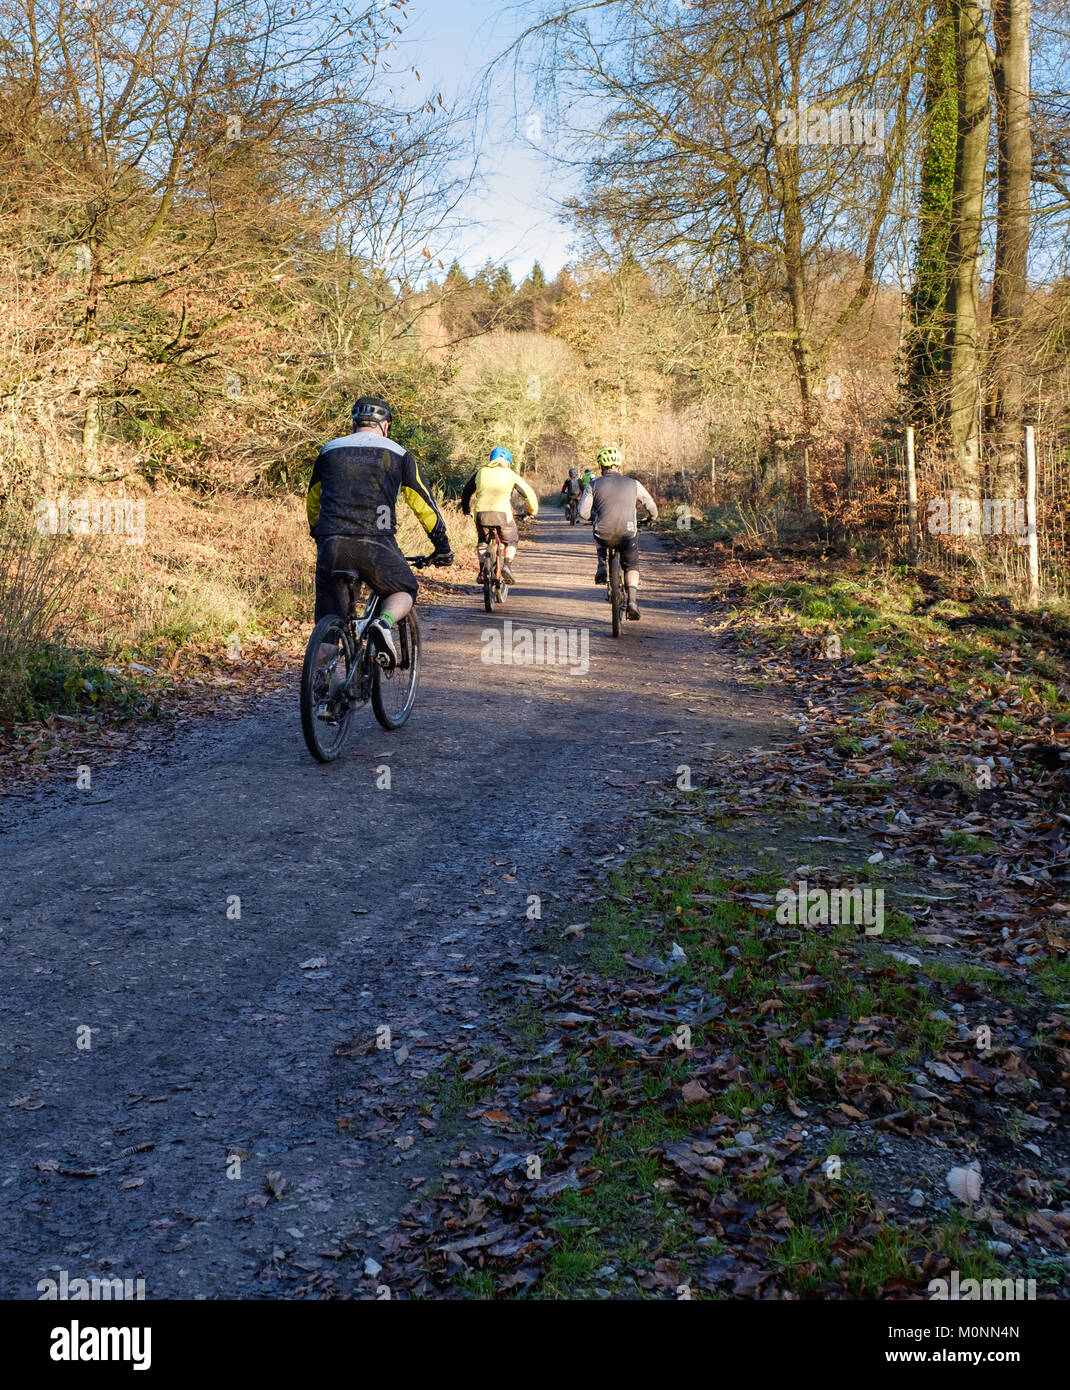 MOUNTAIN BIKING IN FOREST OF DEAN, Gloucestershire, England UK Stock Photo